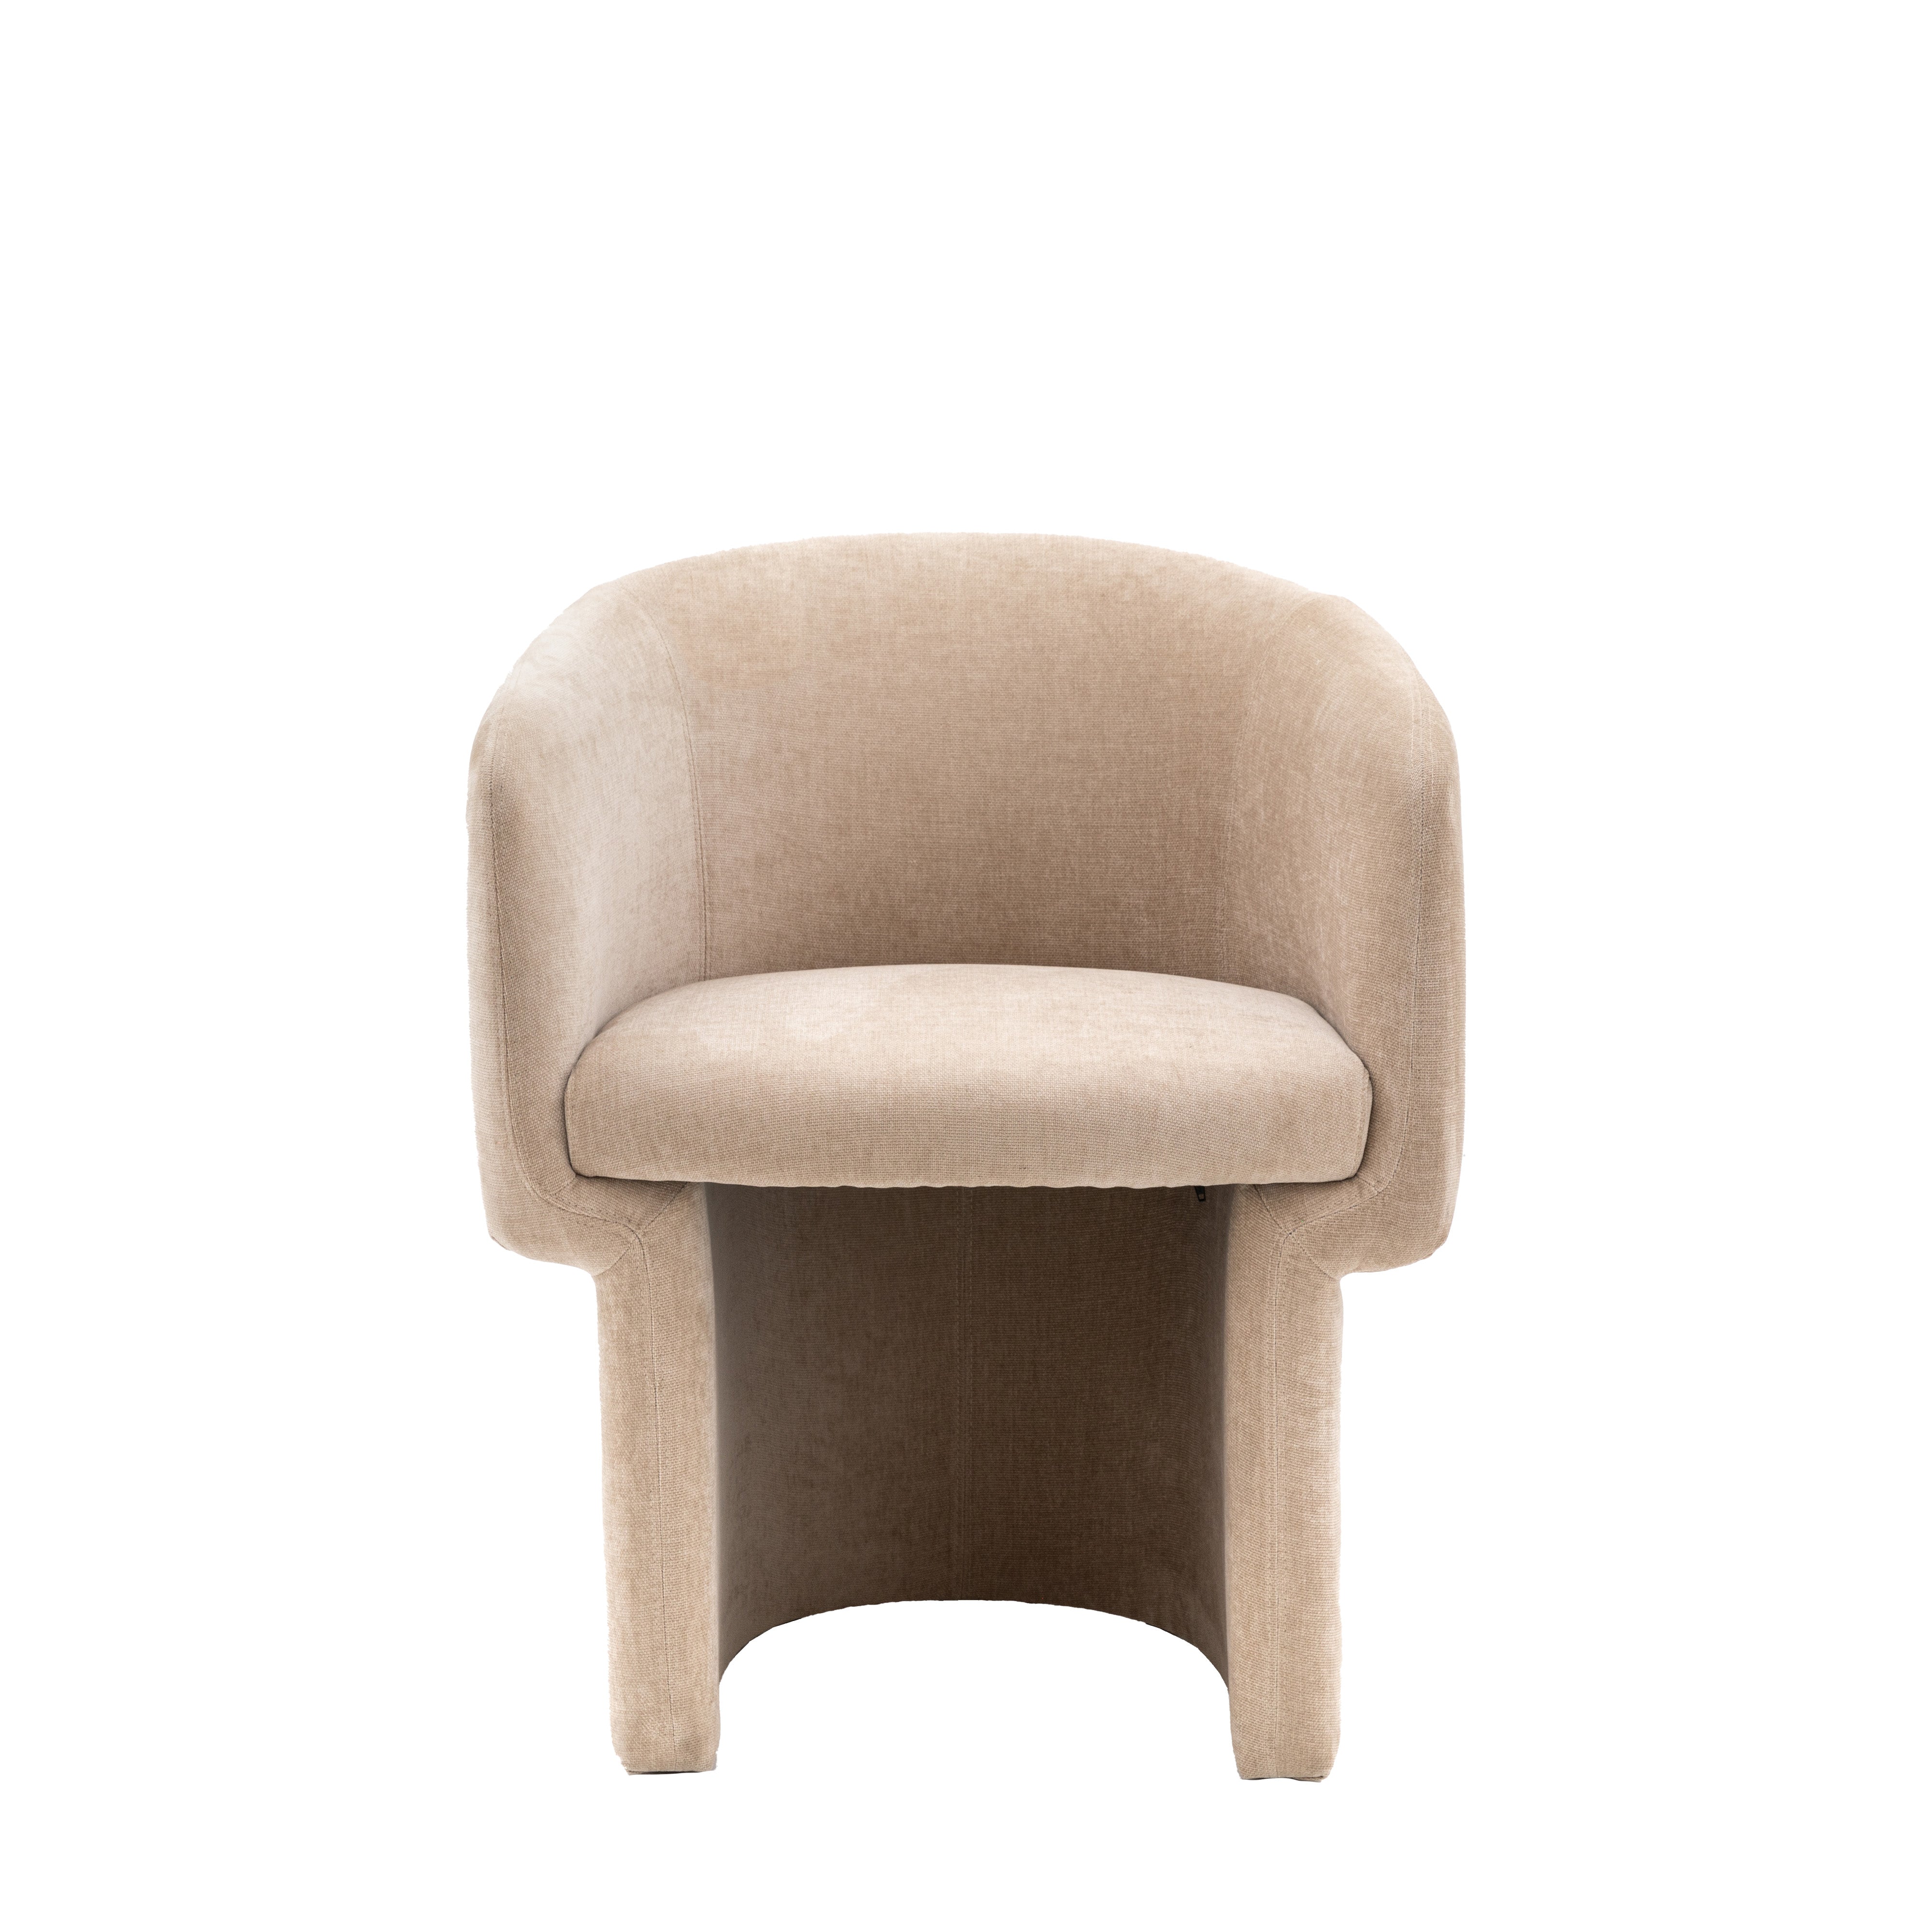 Holm Dining Chair - Cream - hus & co.